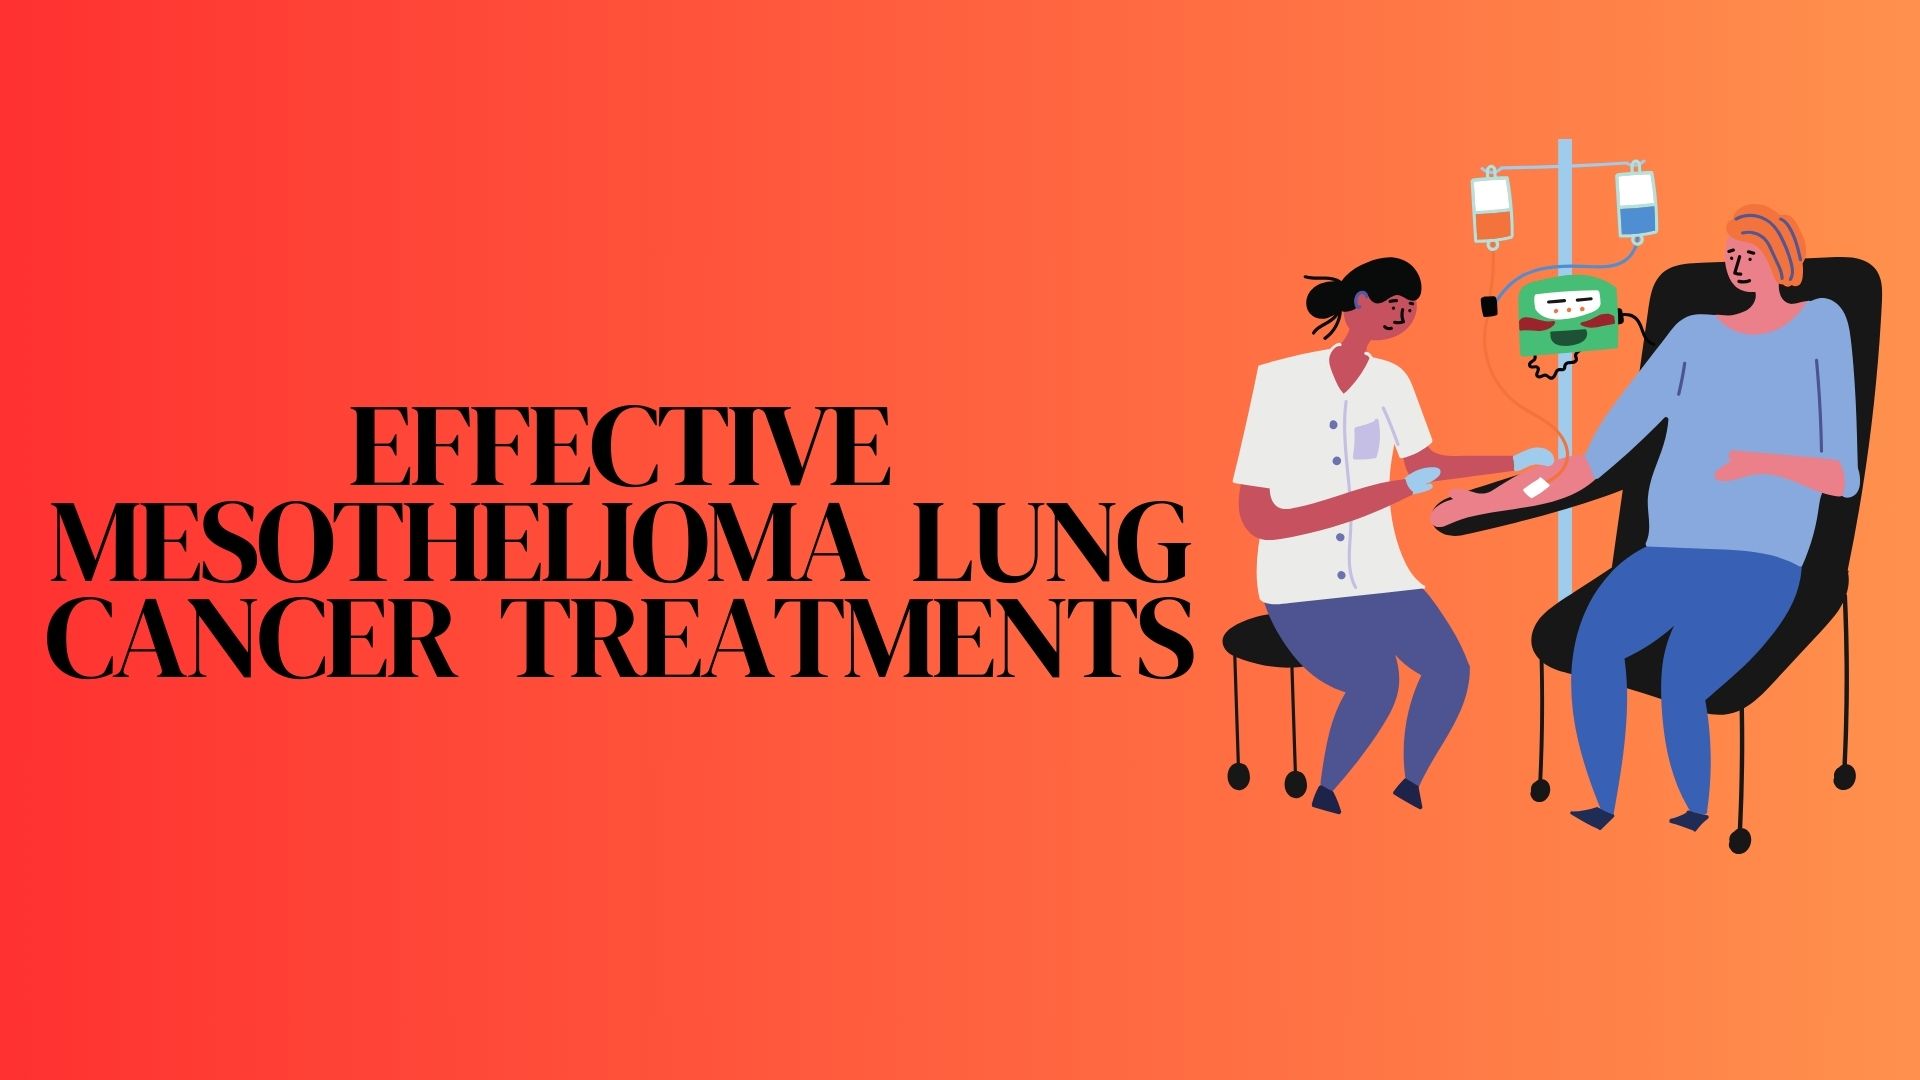 Effective Mesothelioma Lung Cancer Treatments